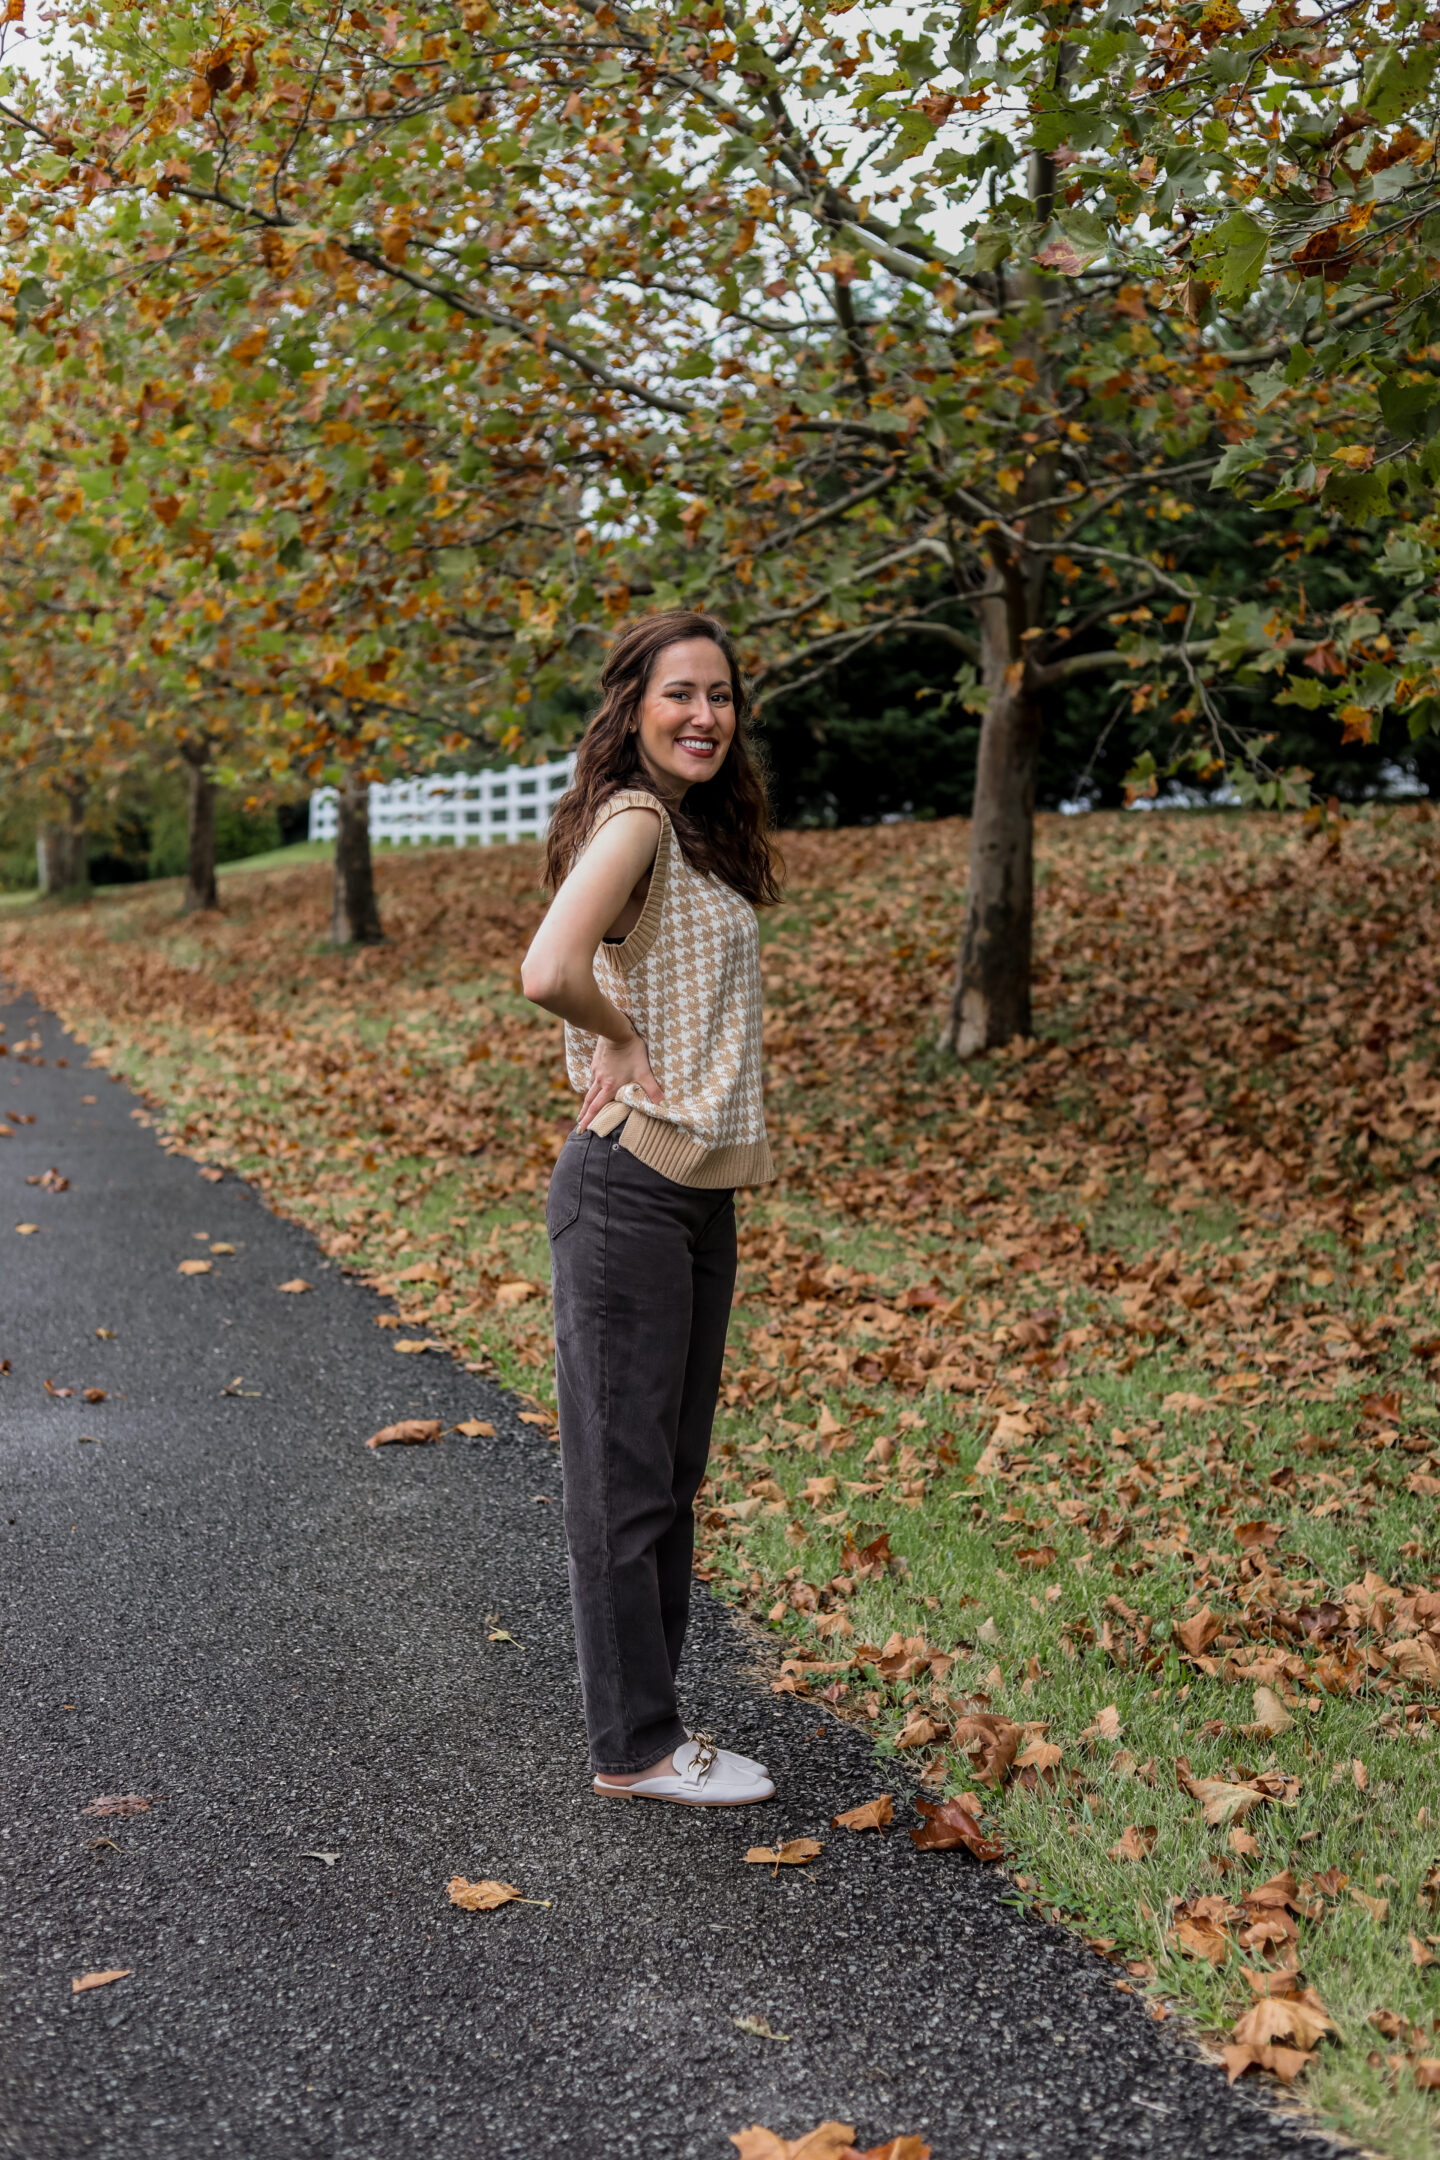 HOW TO WEAR A SWEATER VEST - Transitional Fall Outfit Idea on Coming Up Roses